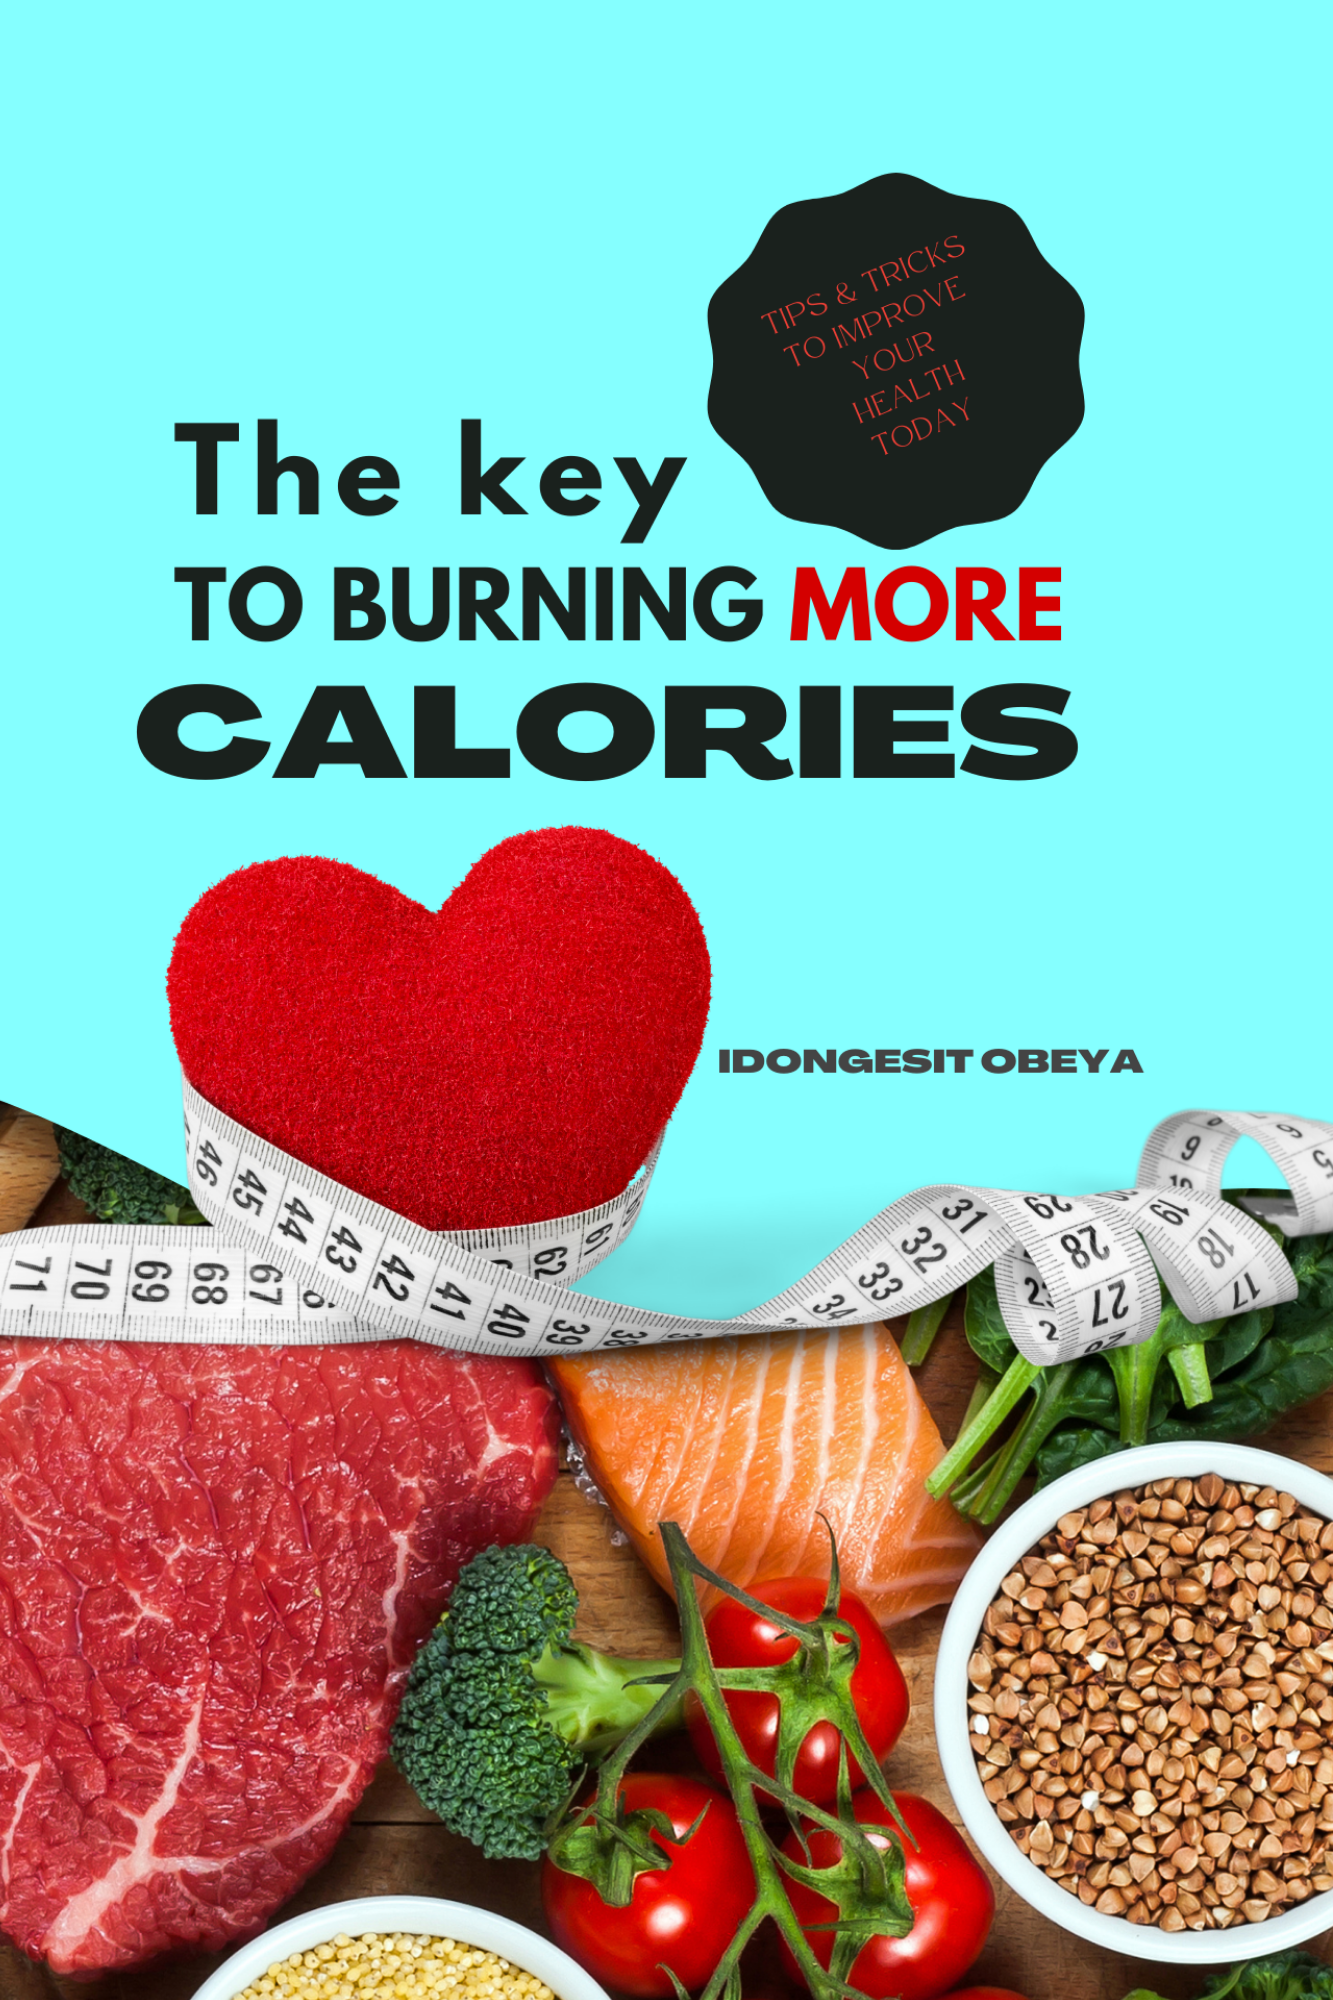 The key to burning more calories